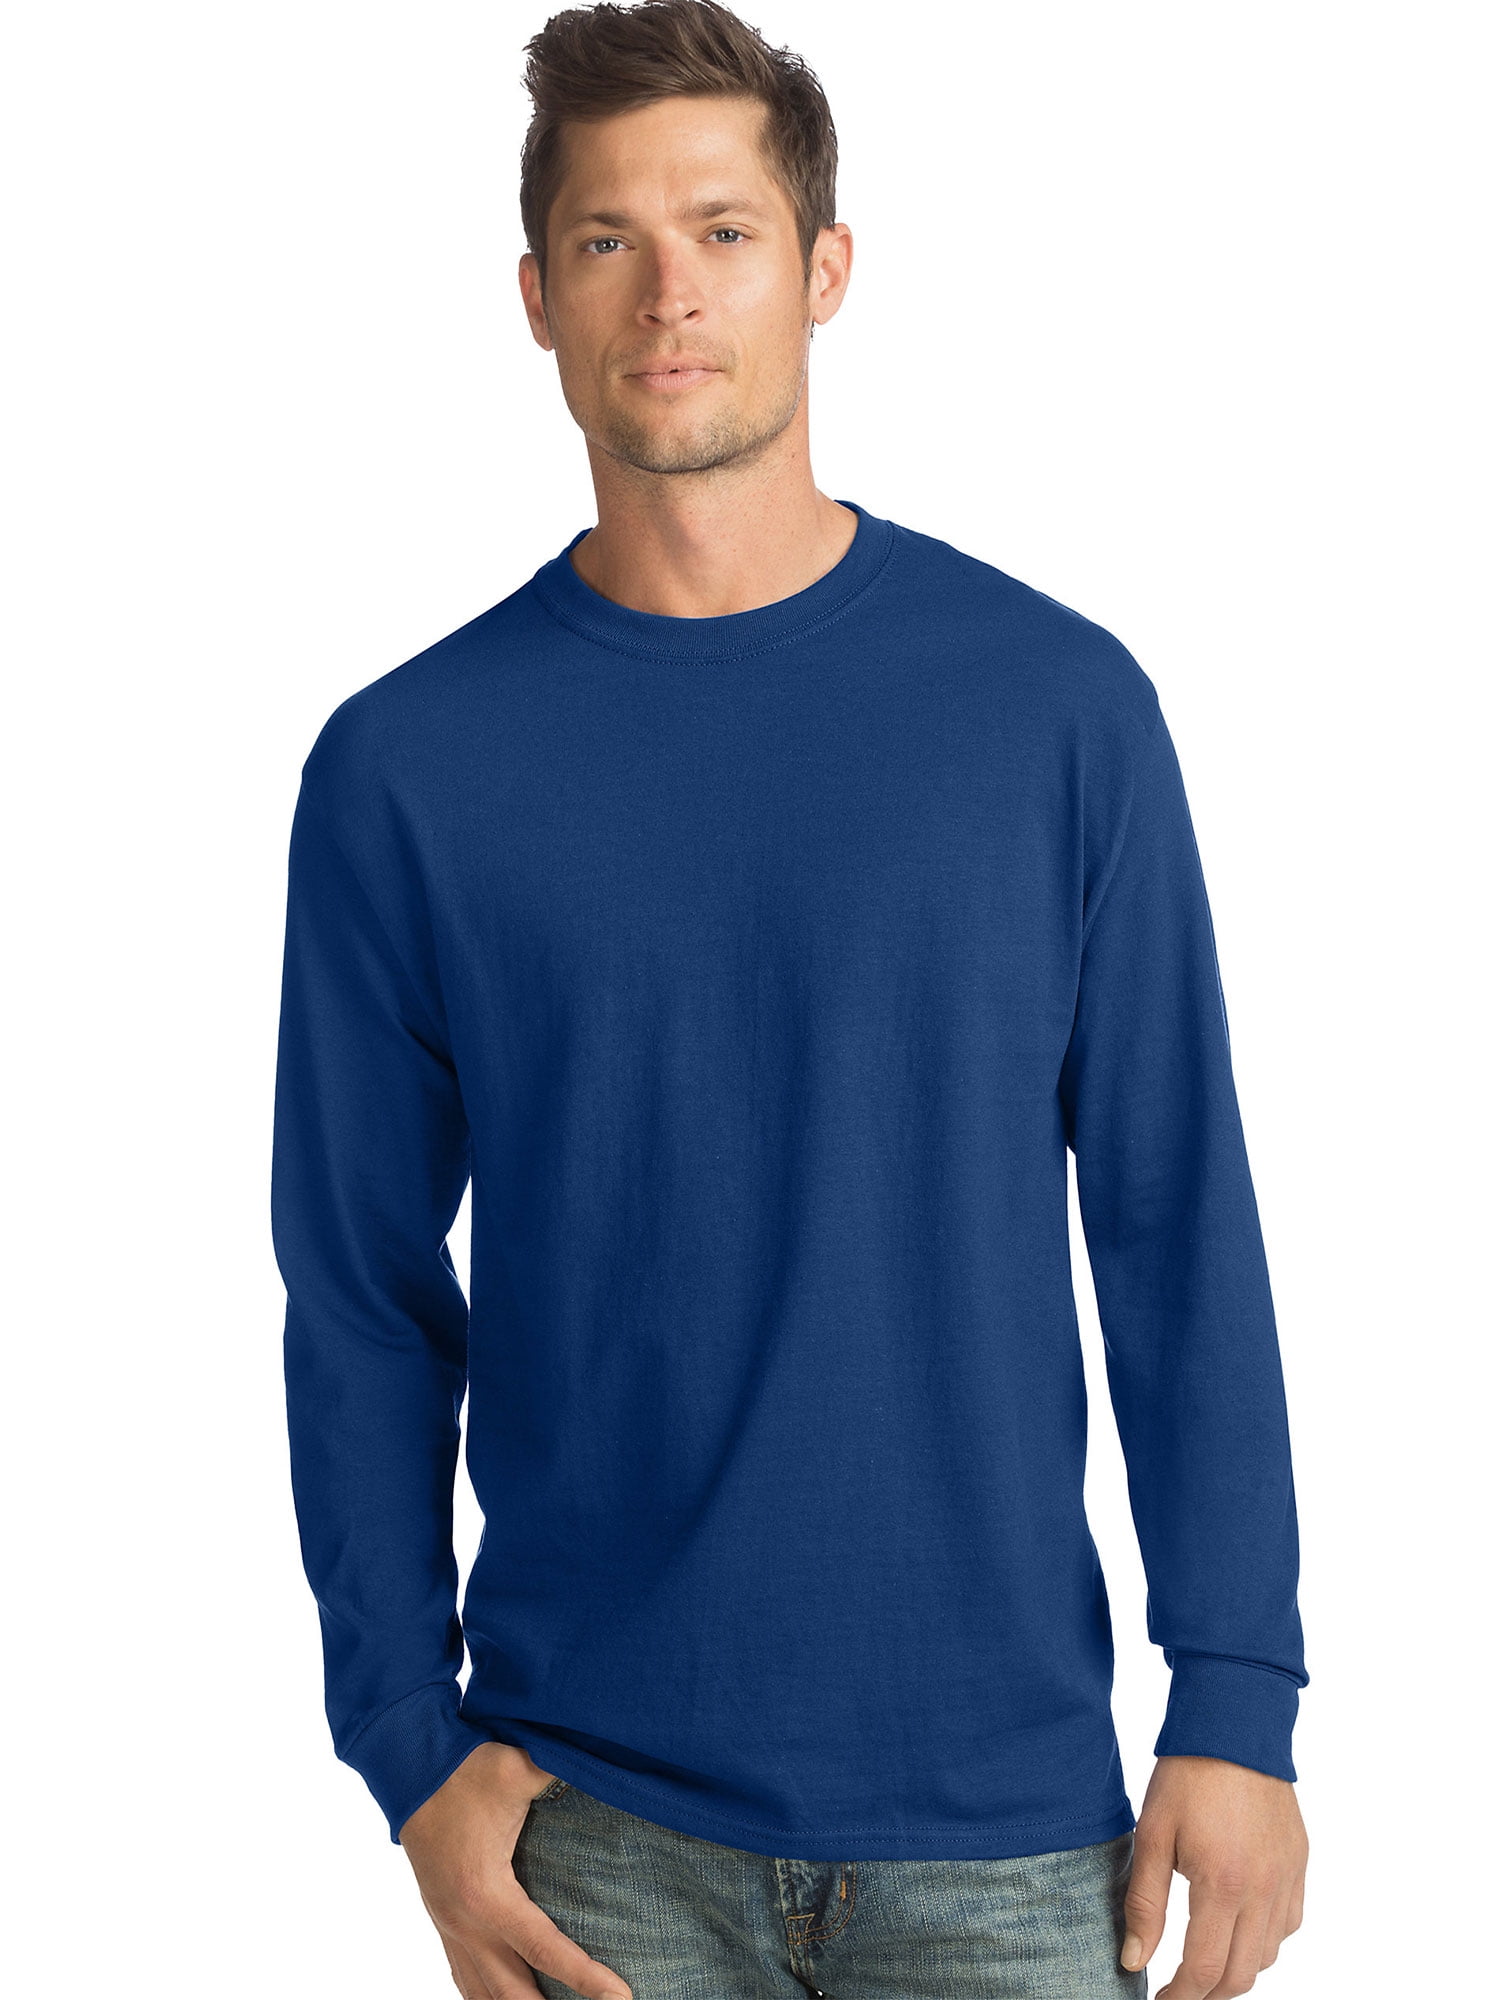 4-Pack Hanes Mens Essentials Long Sleeve T-Shirt Value Pack